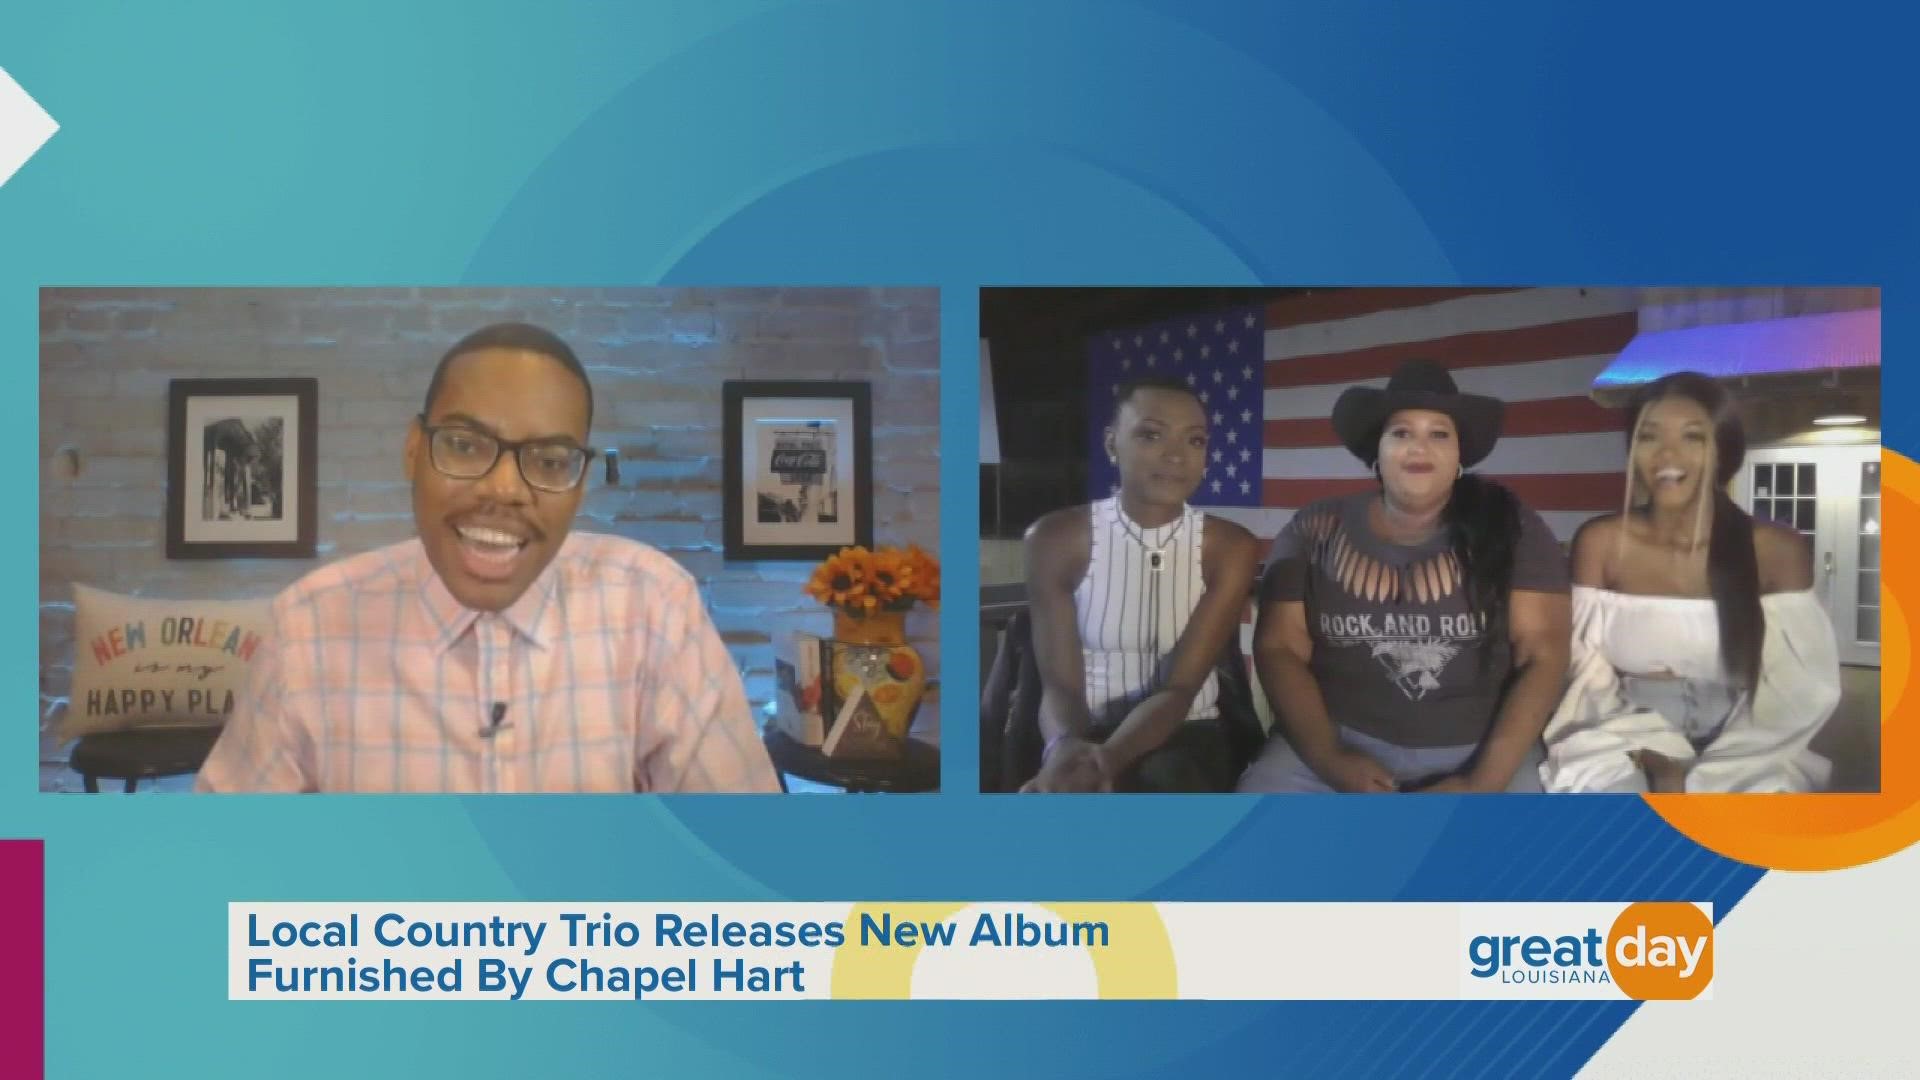 Country trio "Chapel Hart" shared details about their new album which comes out on August 28th.